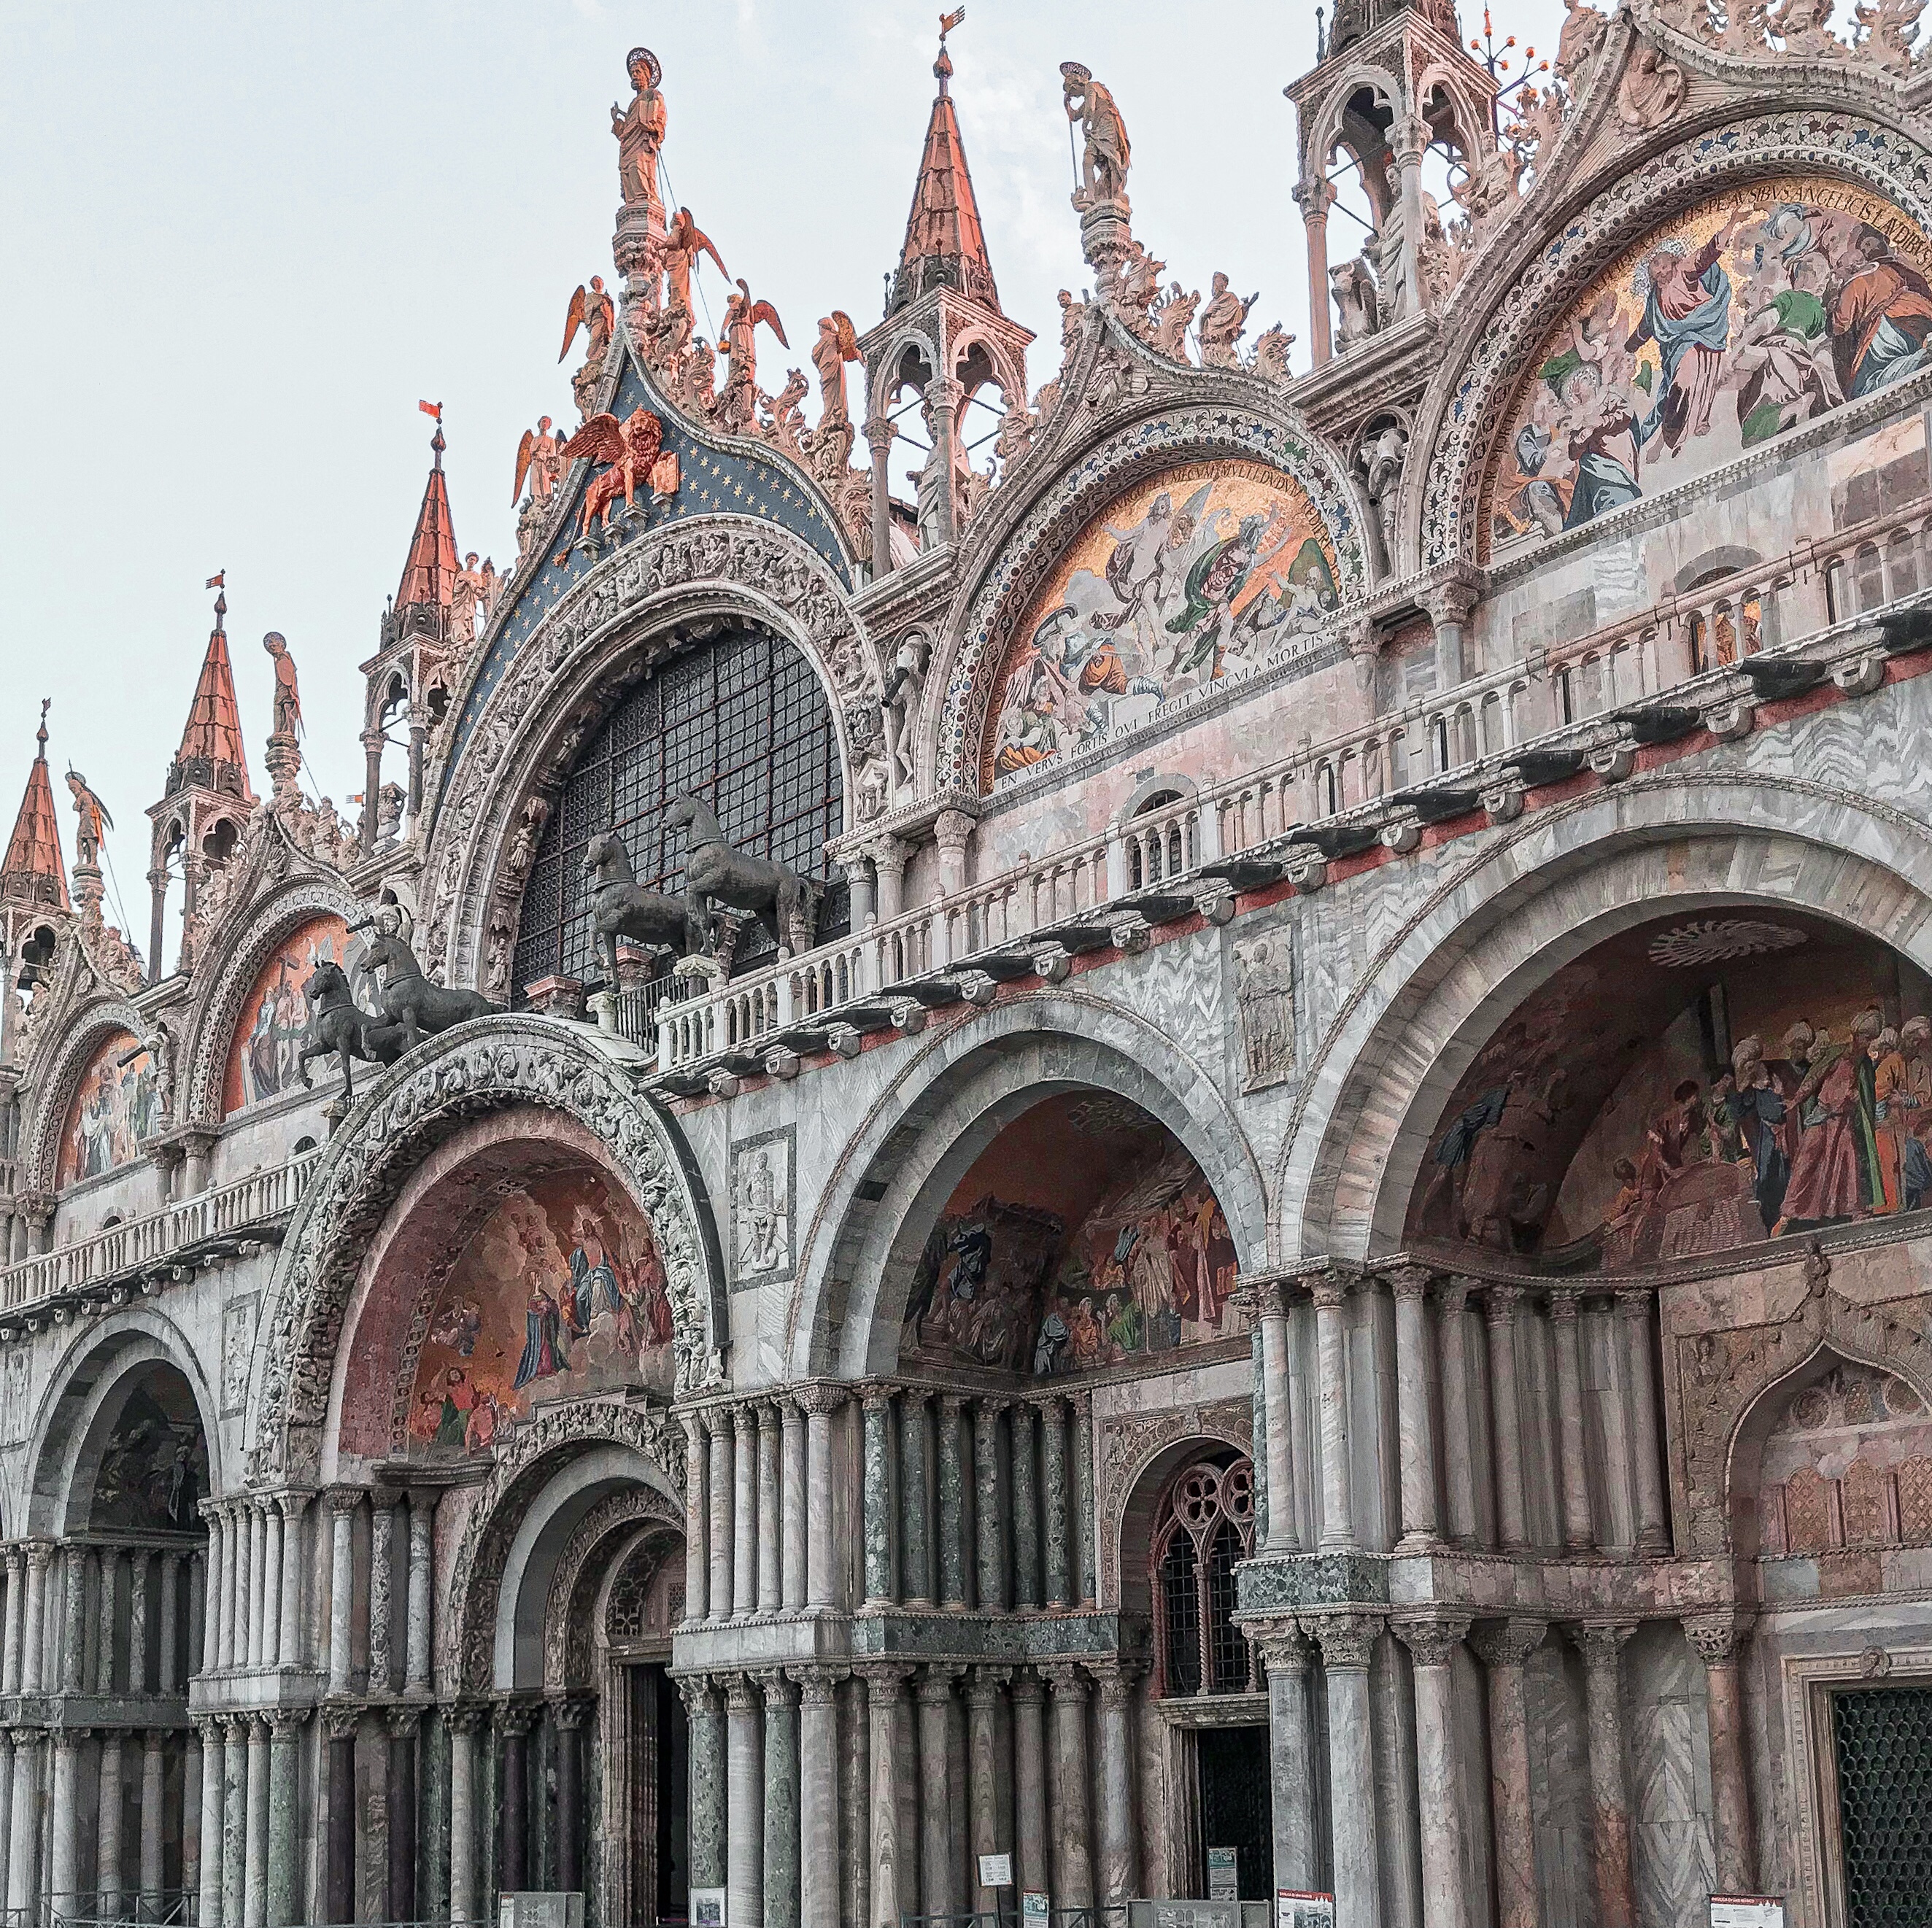 St. Mark’s Basilica is a jewel of architecture in Eastern style with a mixture of Greek, Byzantine, and Muslim influences.